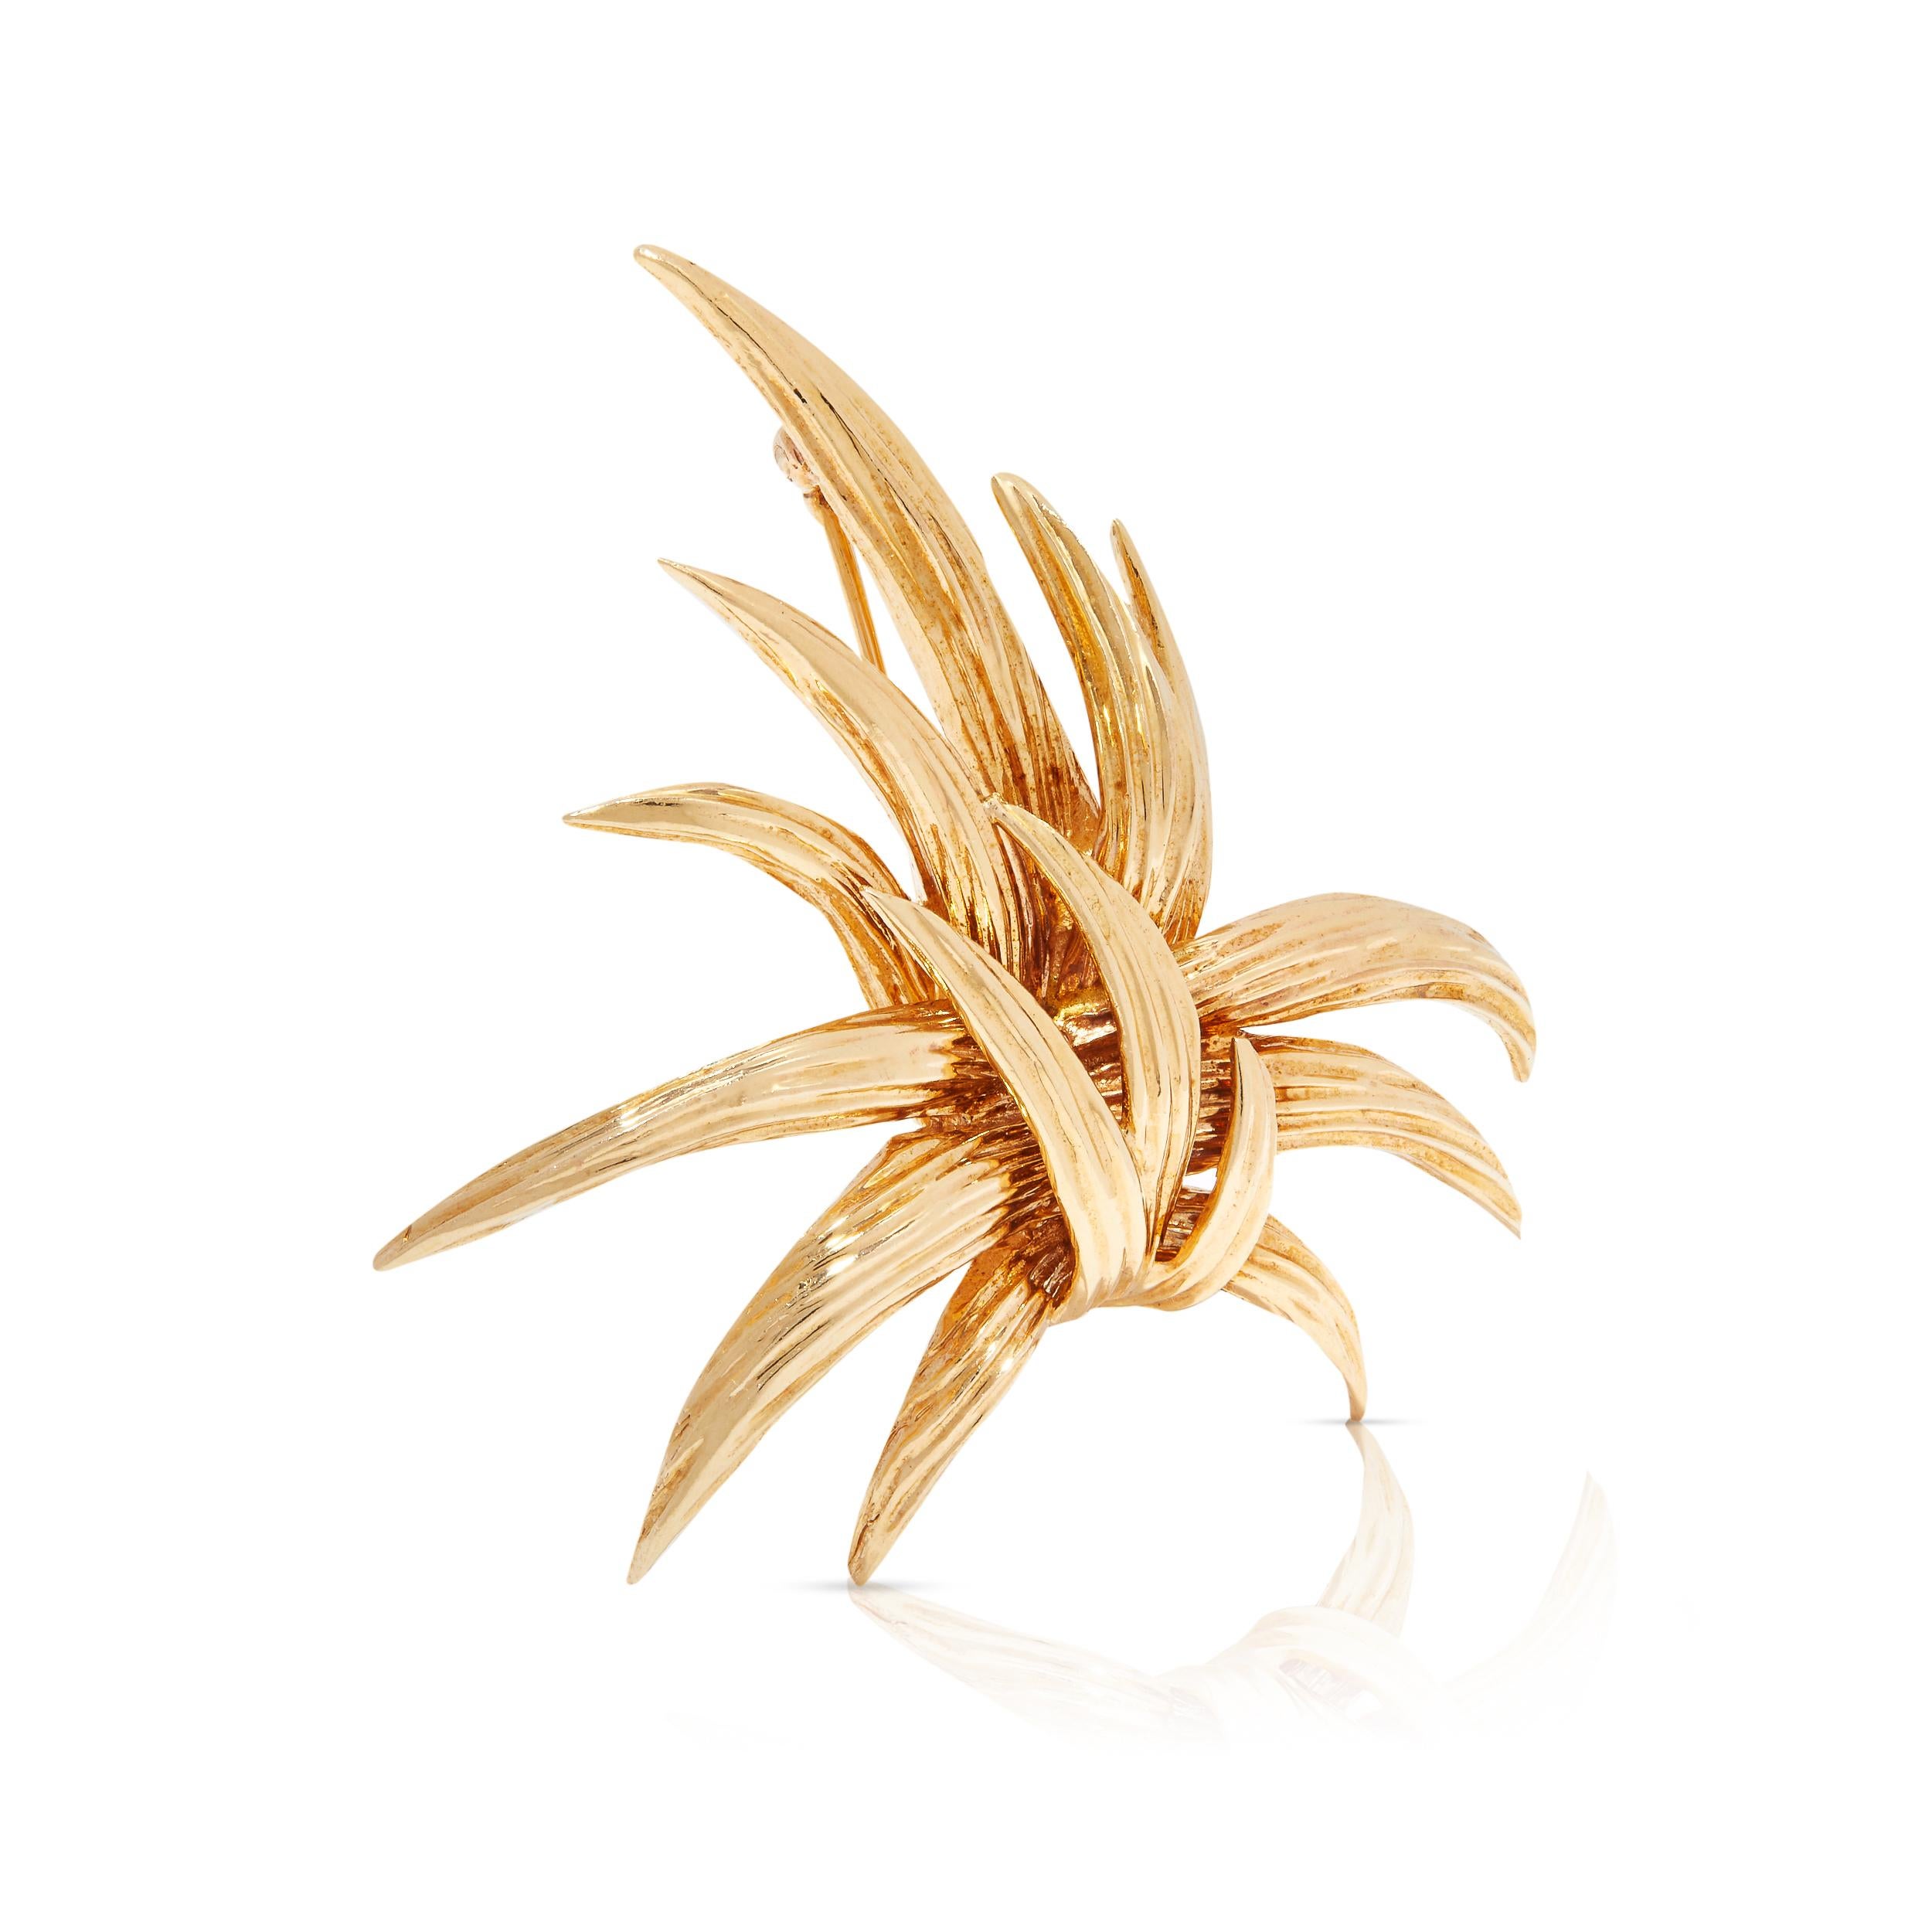 This spectacular gold brooch is designed to turn heads and distract eyes during conversations. The kinetic spray motif is composed of shiny 14ct gold spikes, curved outward and sleekly finished in stroke and flute detailing. Gorgeous and impressive,